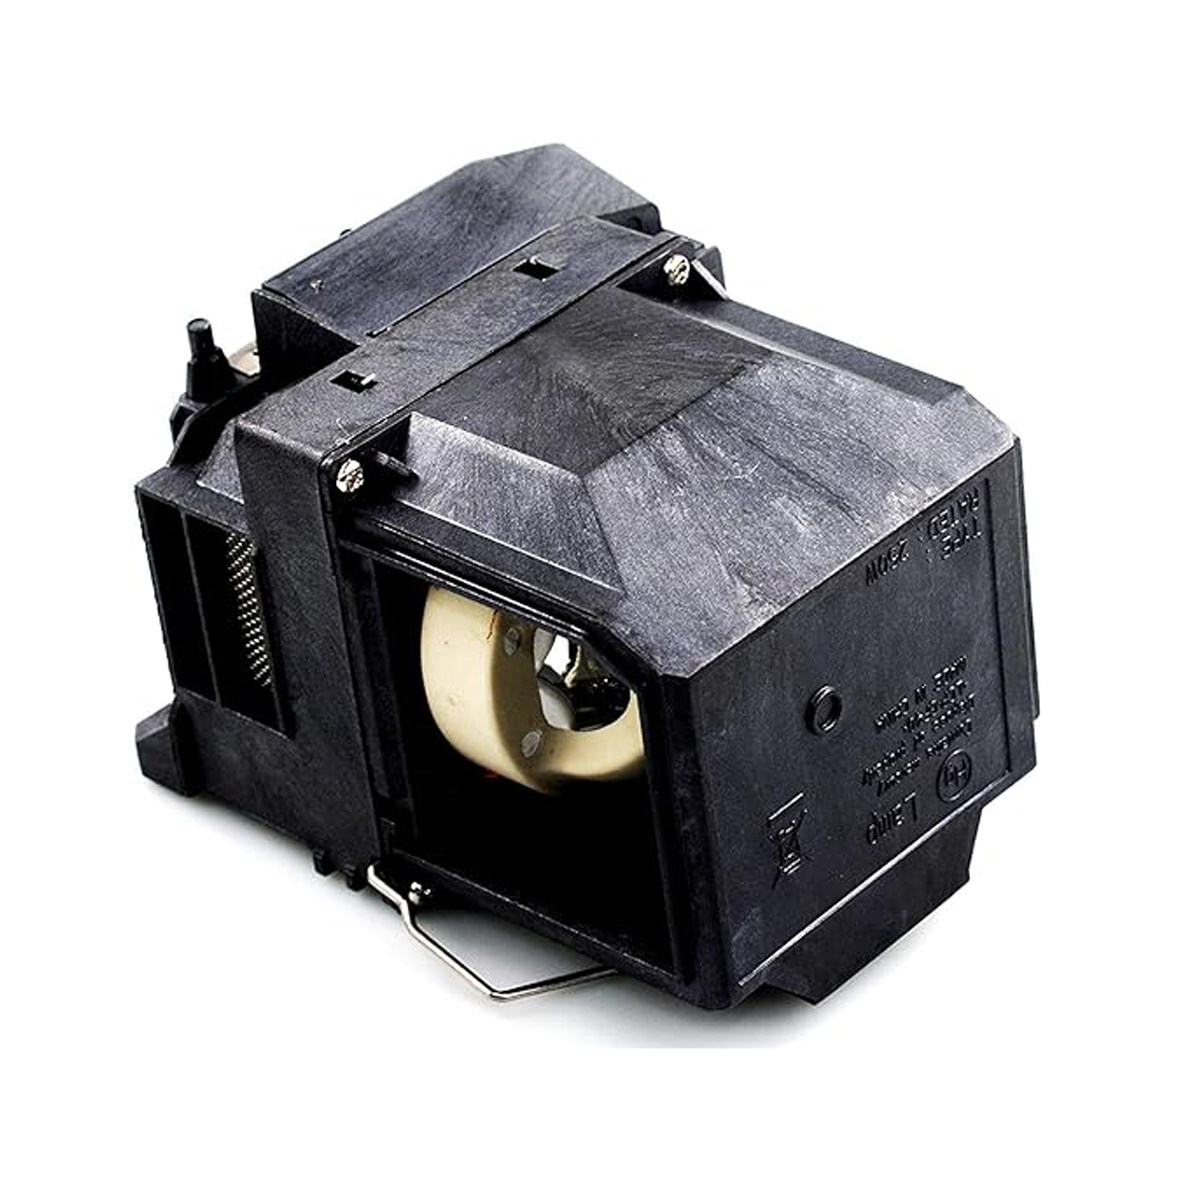 Replacement Projector lamp ELPLP85 For Epson EH-TW6600 EH TW6700 EH TW7000